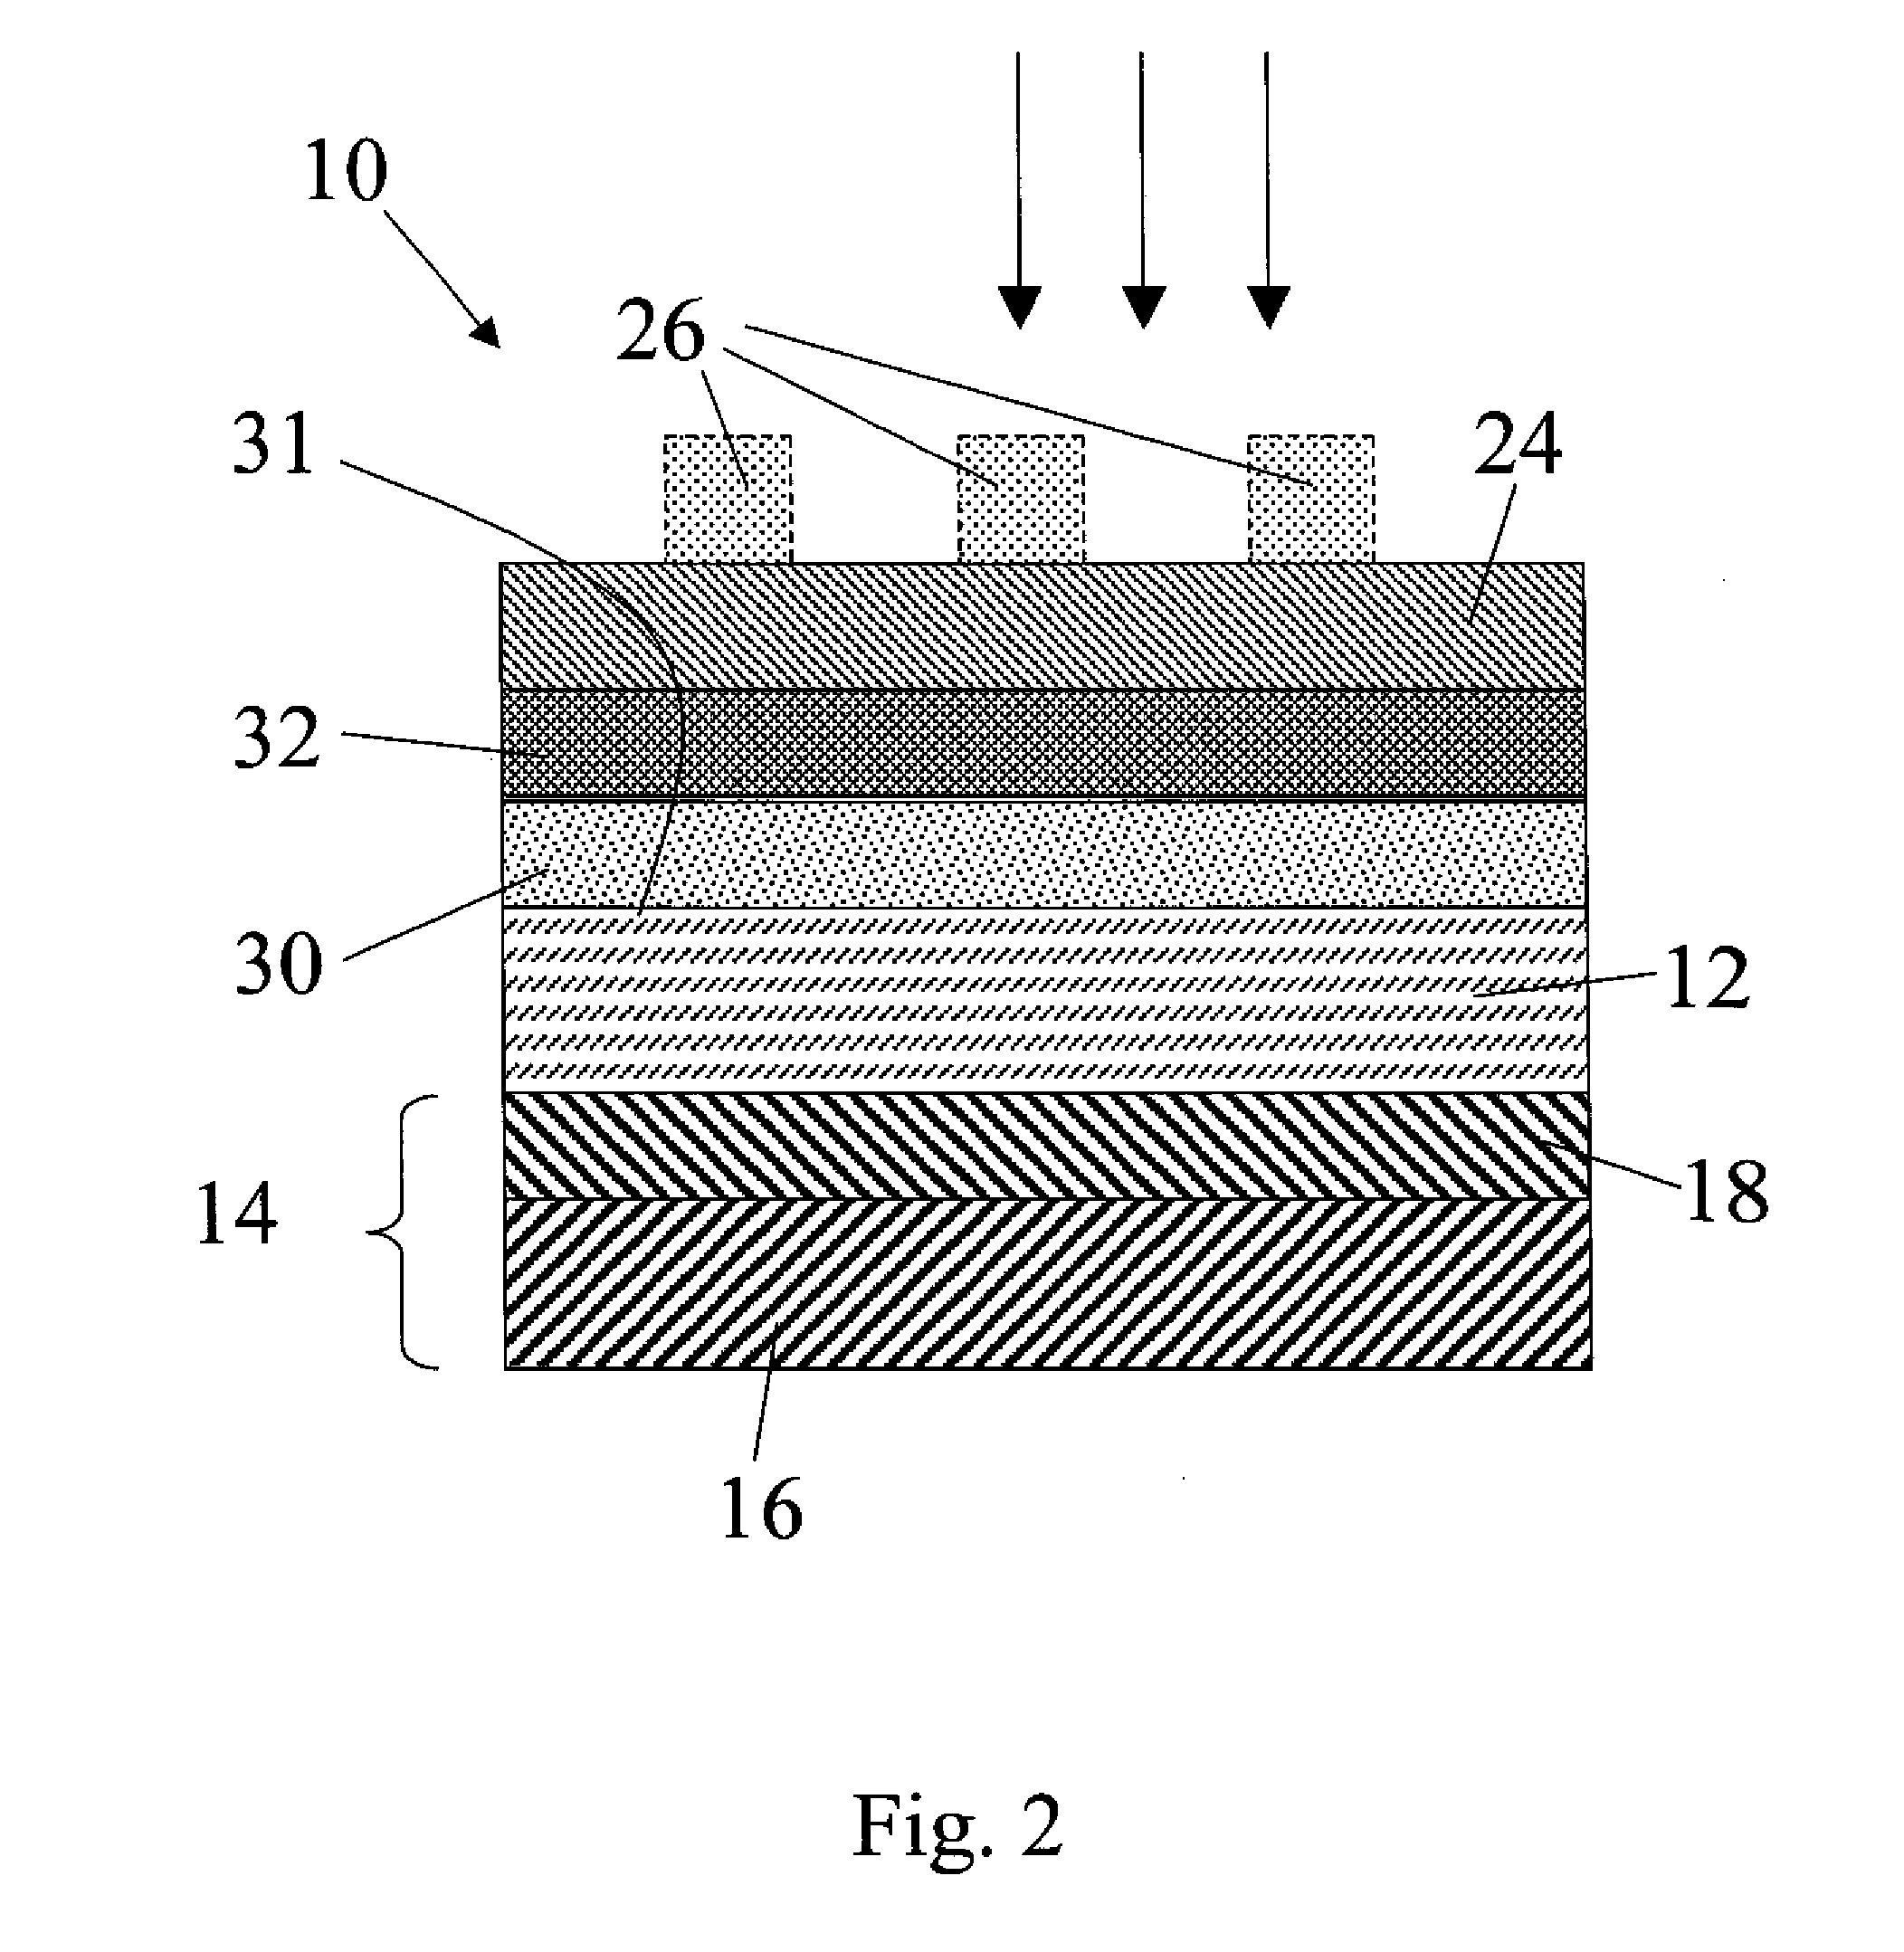 Group iib/va semiconductors suitable for use in photovoltaic devices